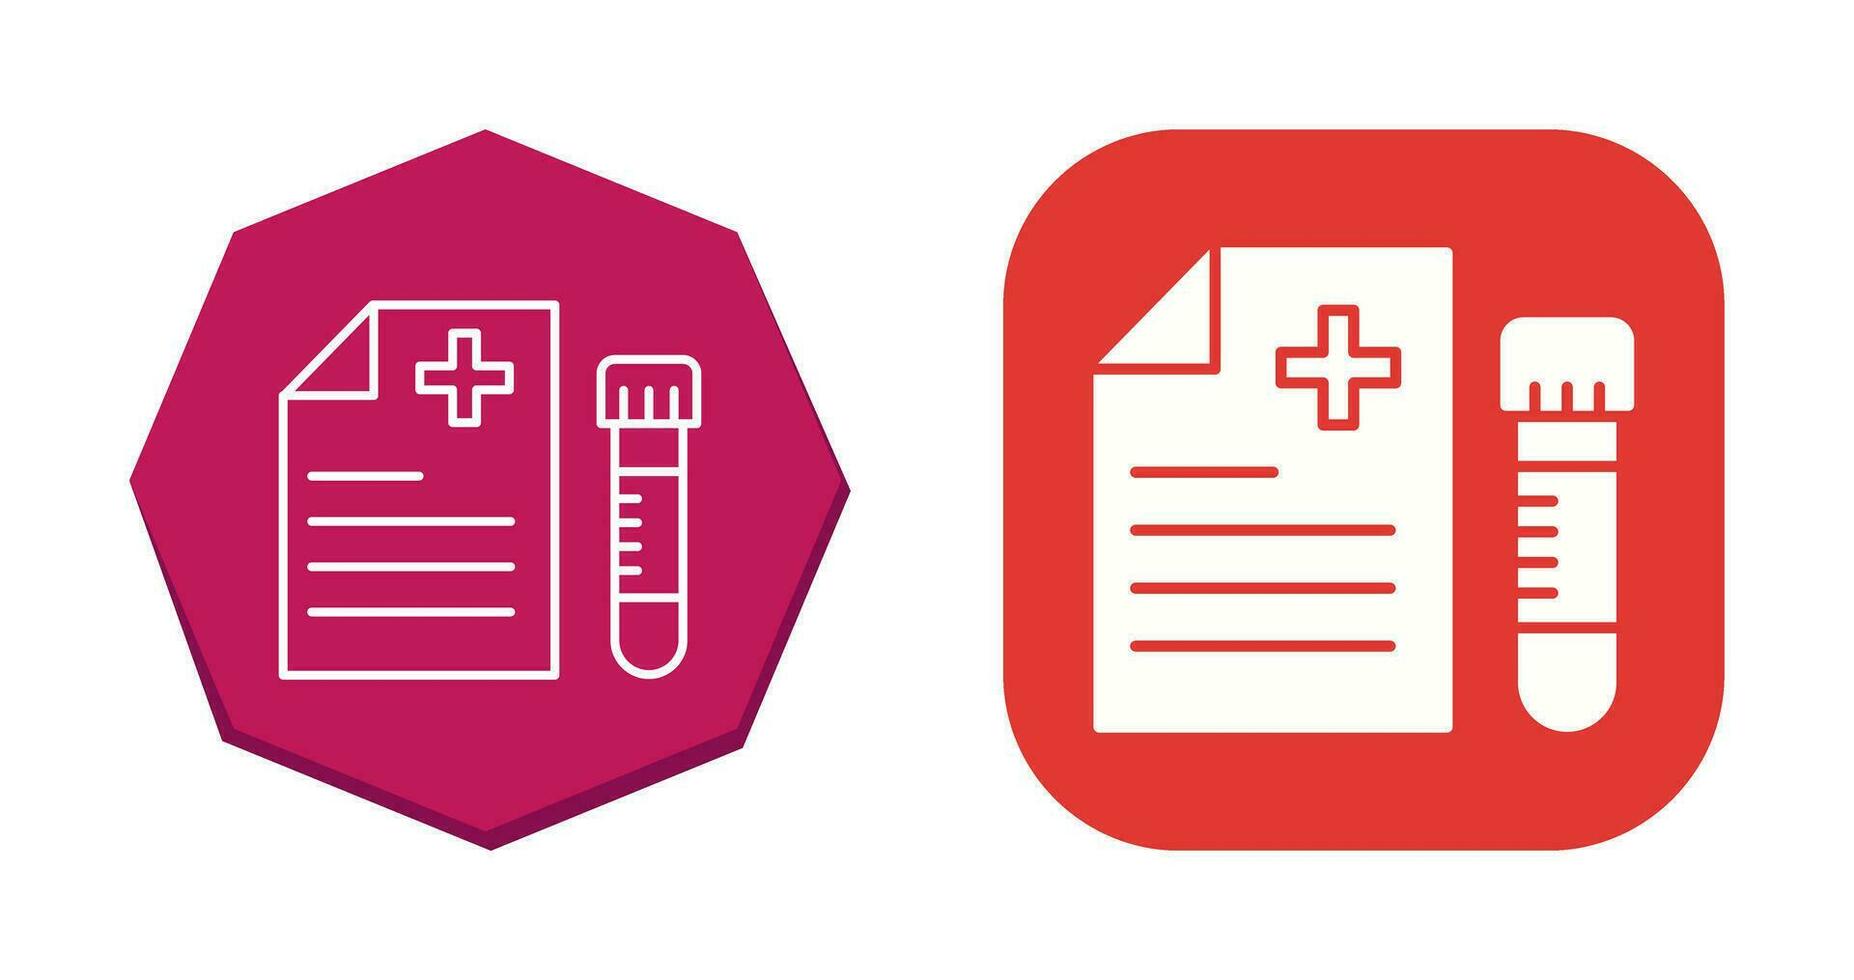 Blood Test Vector Icon